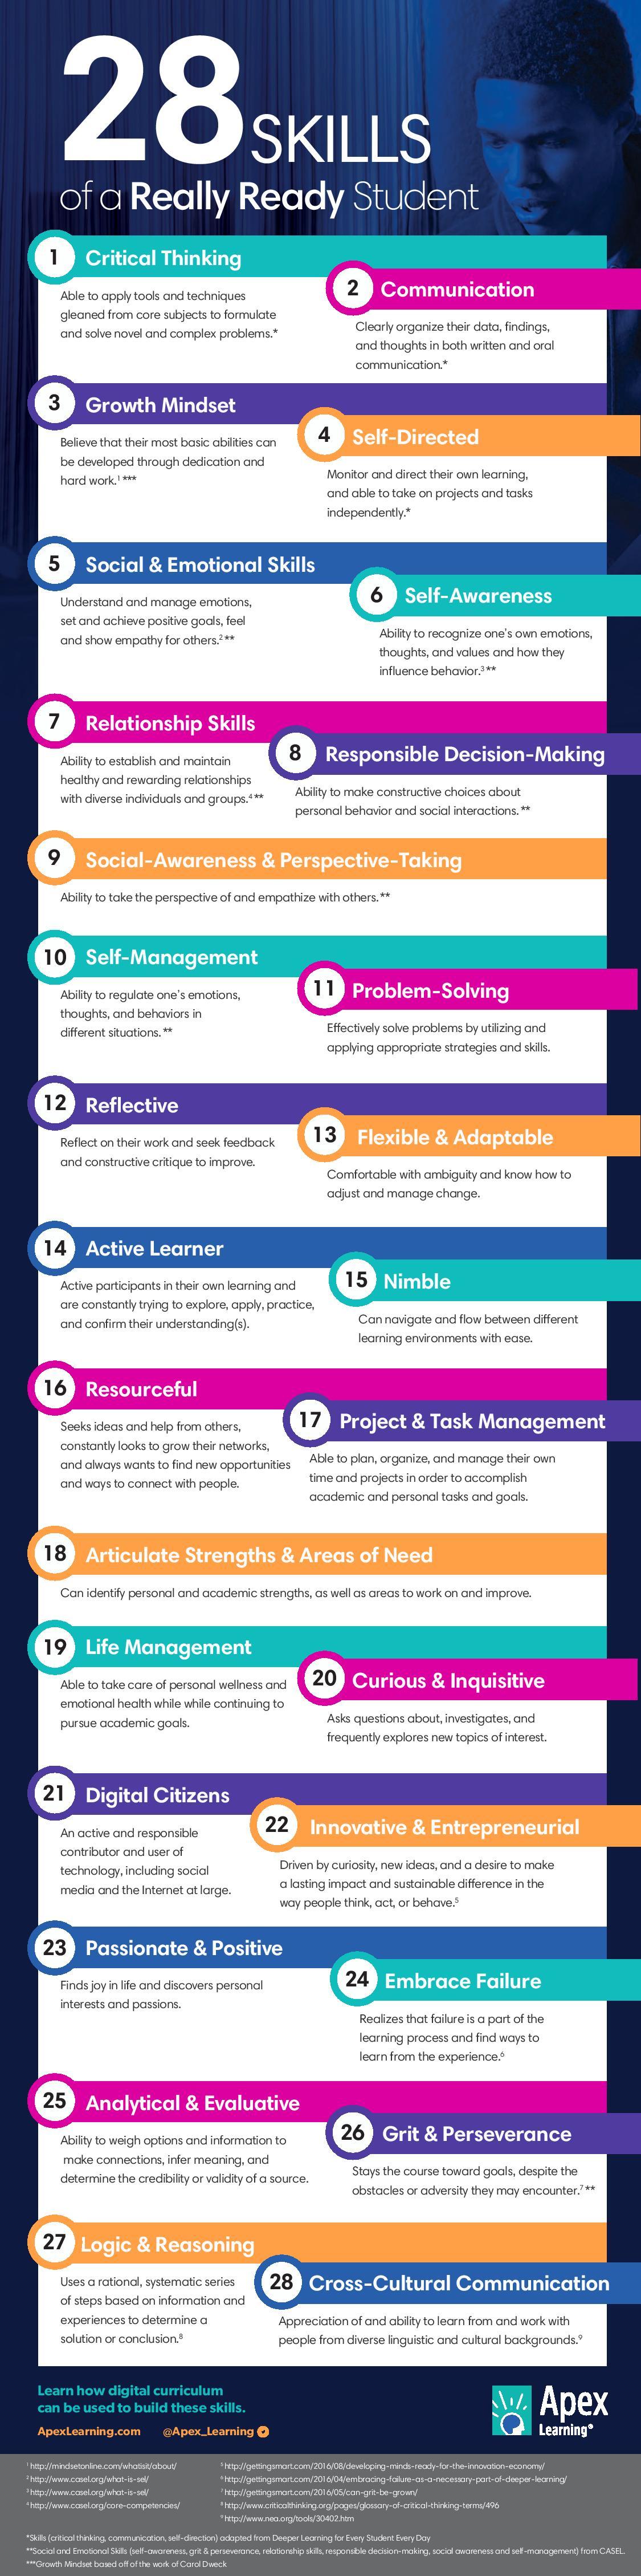 28 Skills of a Really Ready Student Infographic - e-Learning Infographics